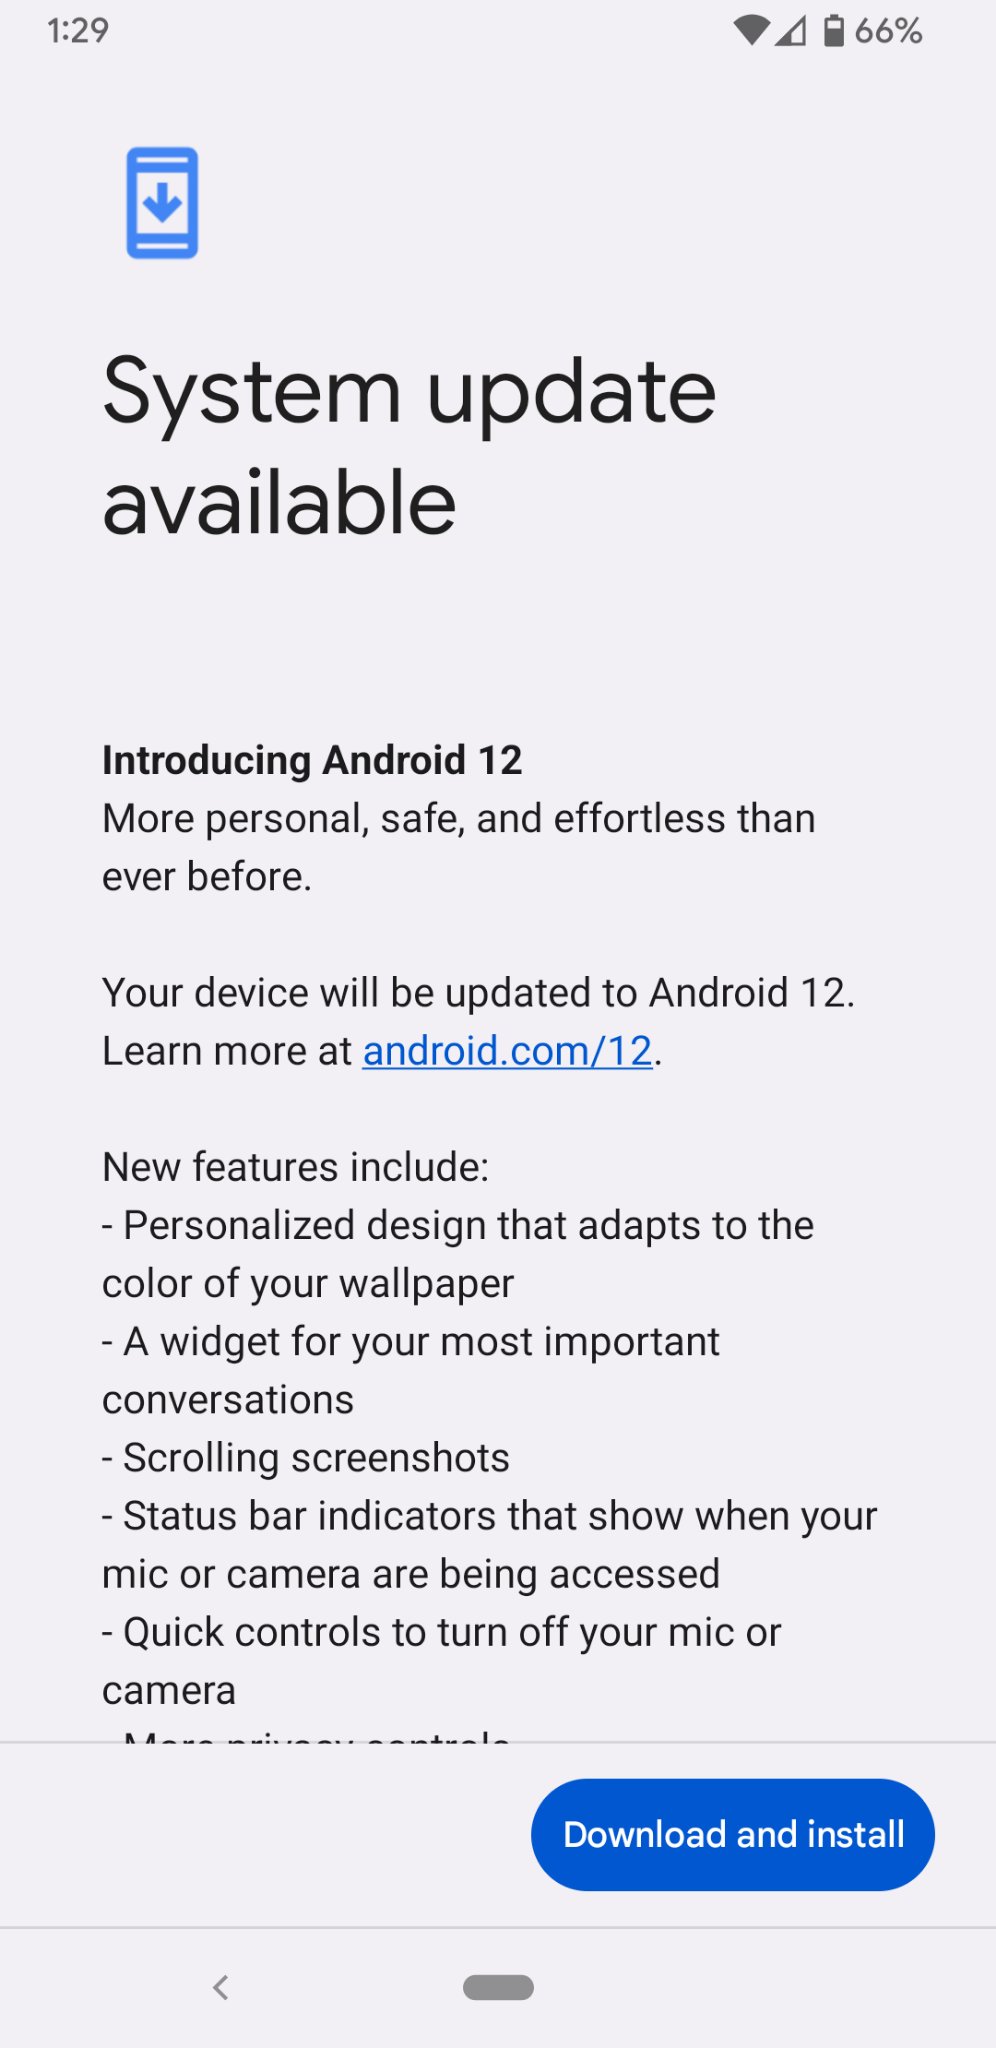 Android 12 will allow users to play a game while it downloads